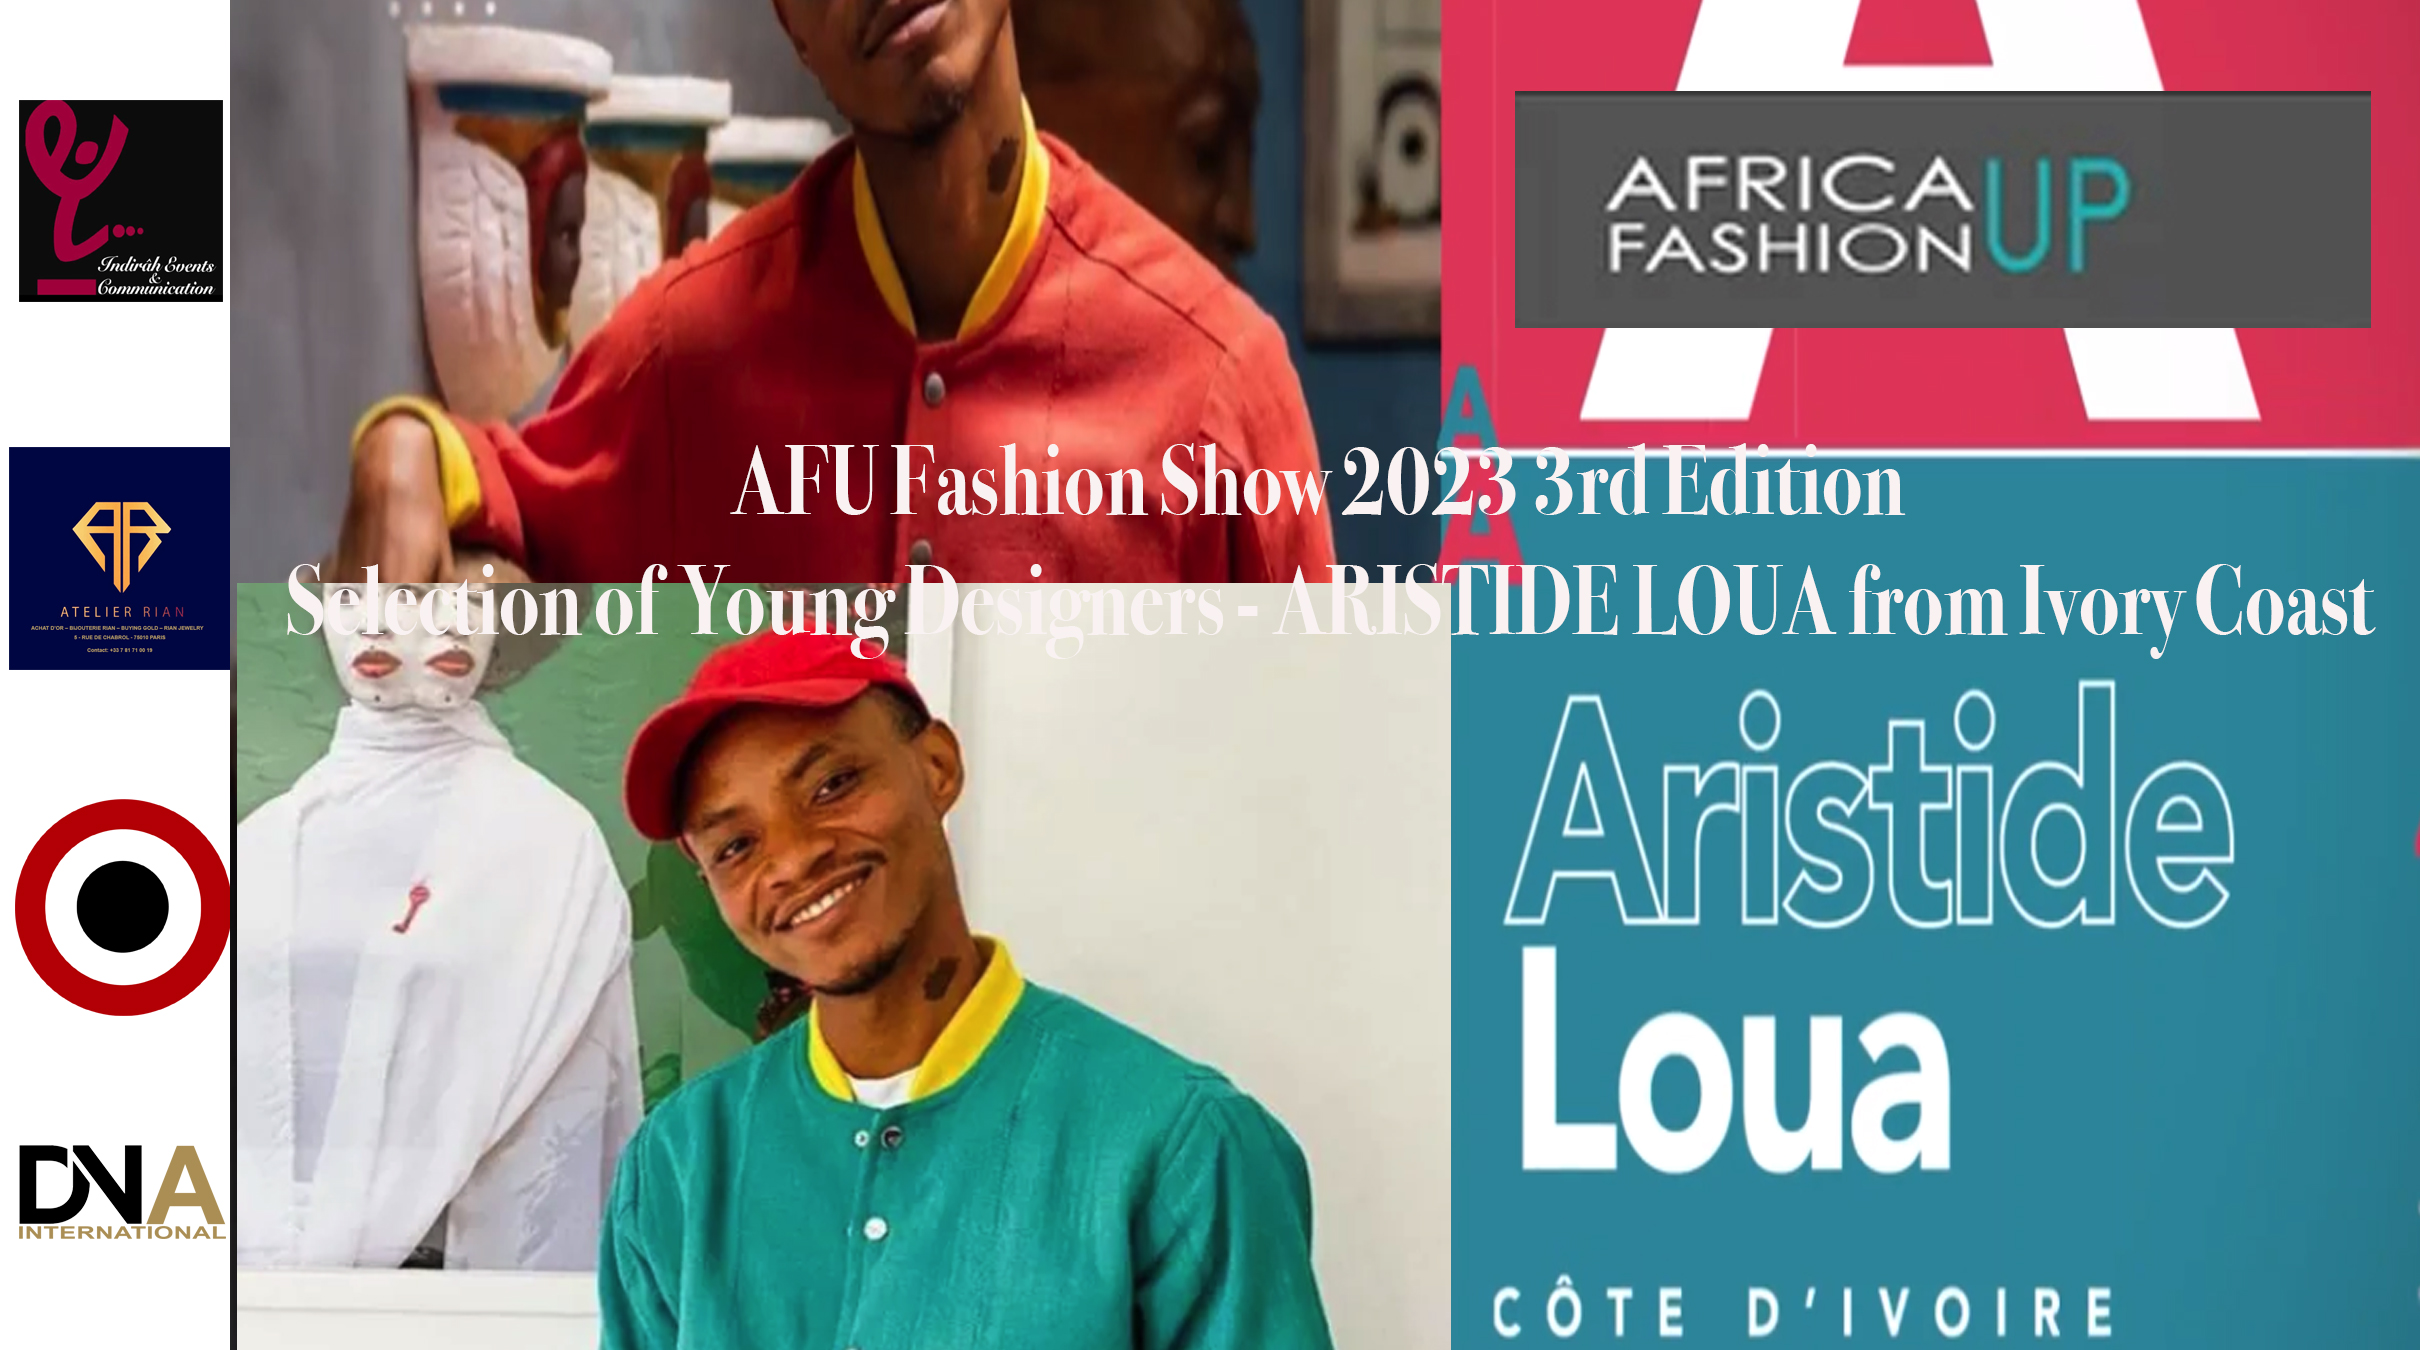 AFRICA-VOGUE-COVER-AFU-Fashion-Show-2023-3rd-Edition-Selection-of-Young-Designers-ARISTIDE-LOUA-from-Ivory-Coast-DN-AFRICA-Media-Partner